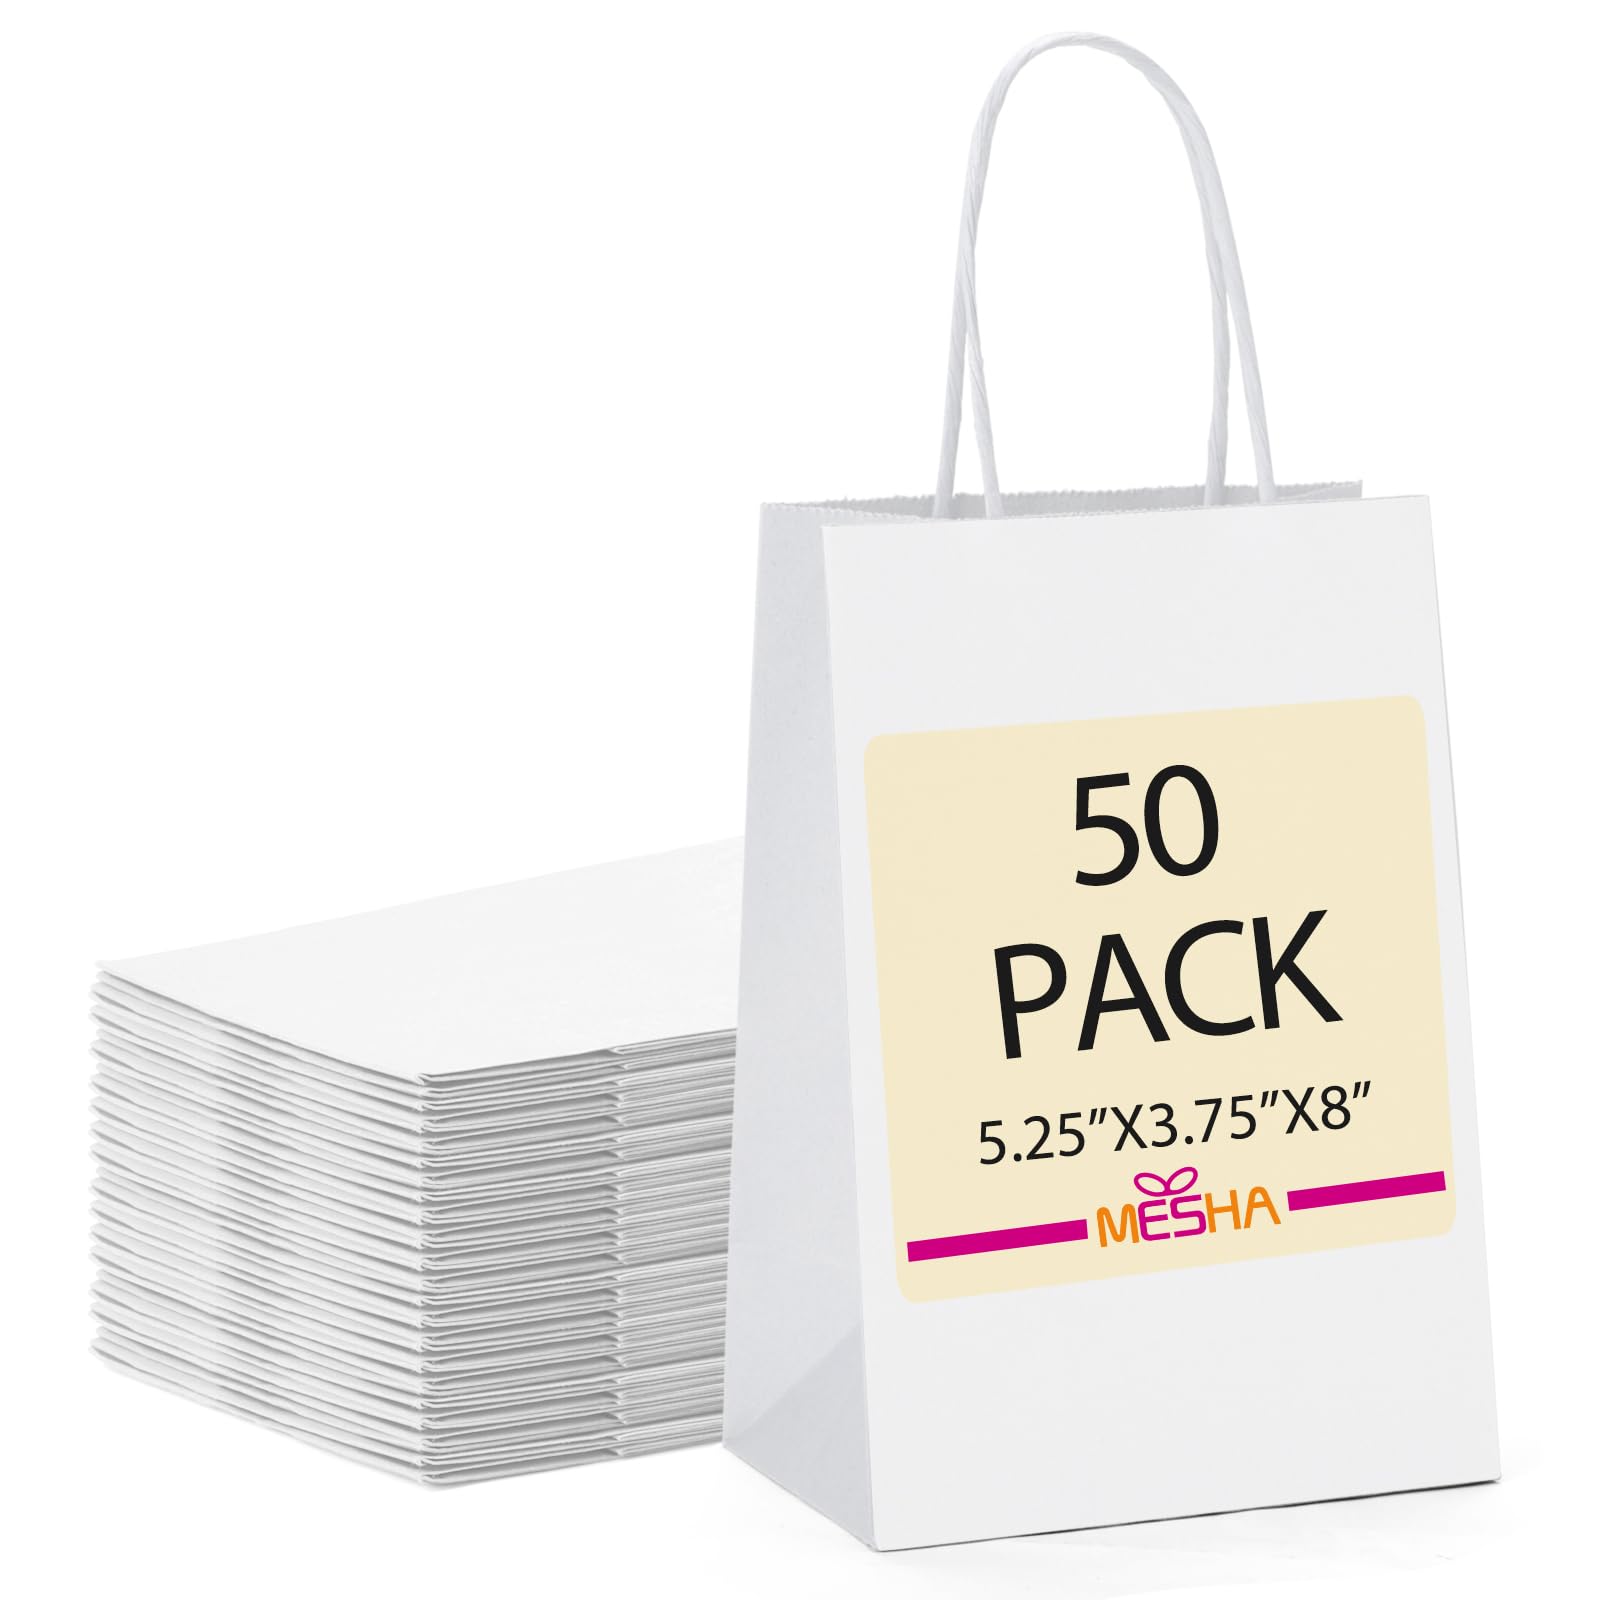 MESHA Paper Gift Bags 5.25x3.75x8 50Pcs White Paper Bags for Small Business,Small Paper Gift Bags with Handles Bulk,Birthday Wedding Party Favor Bags